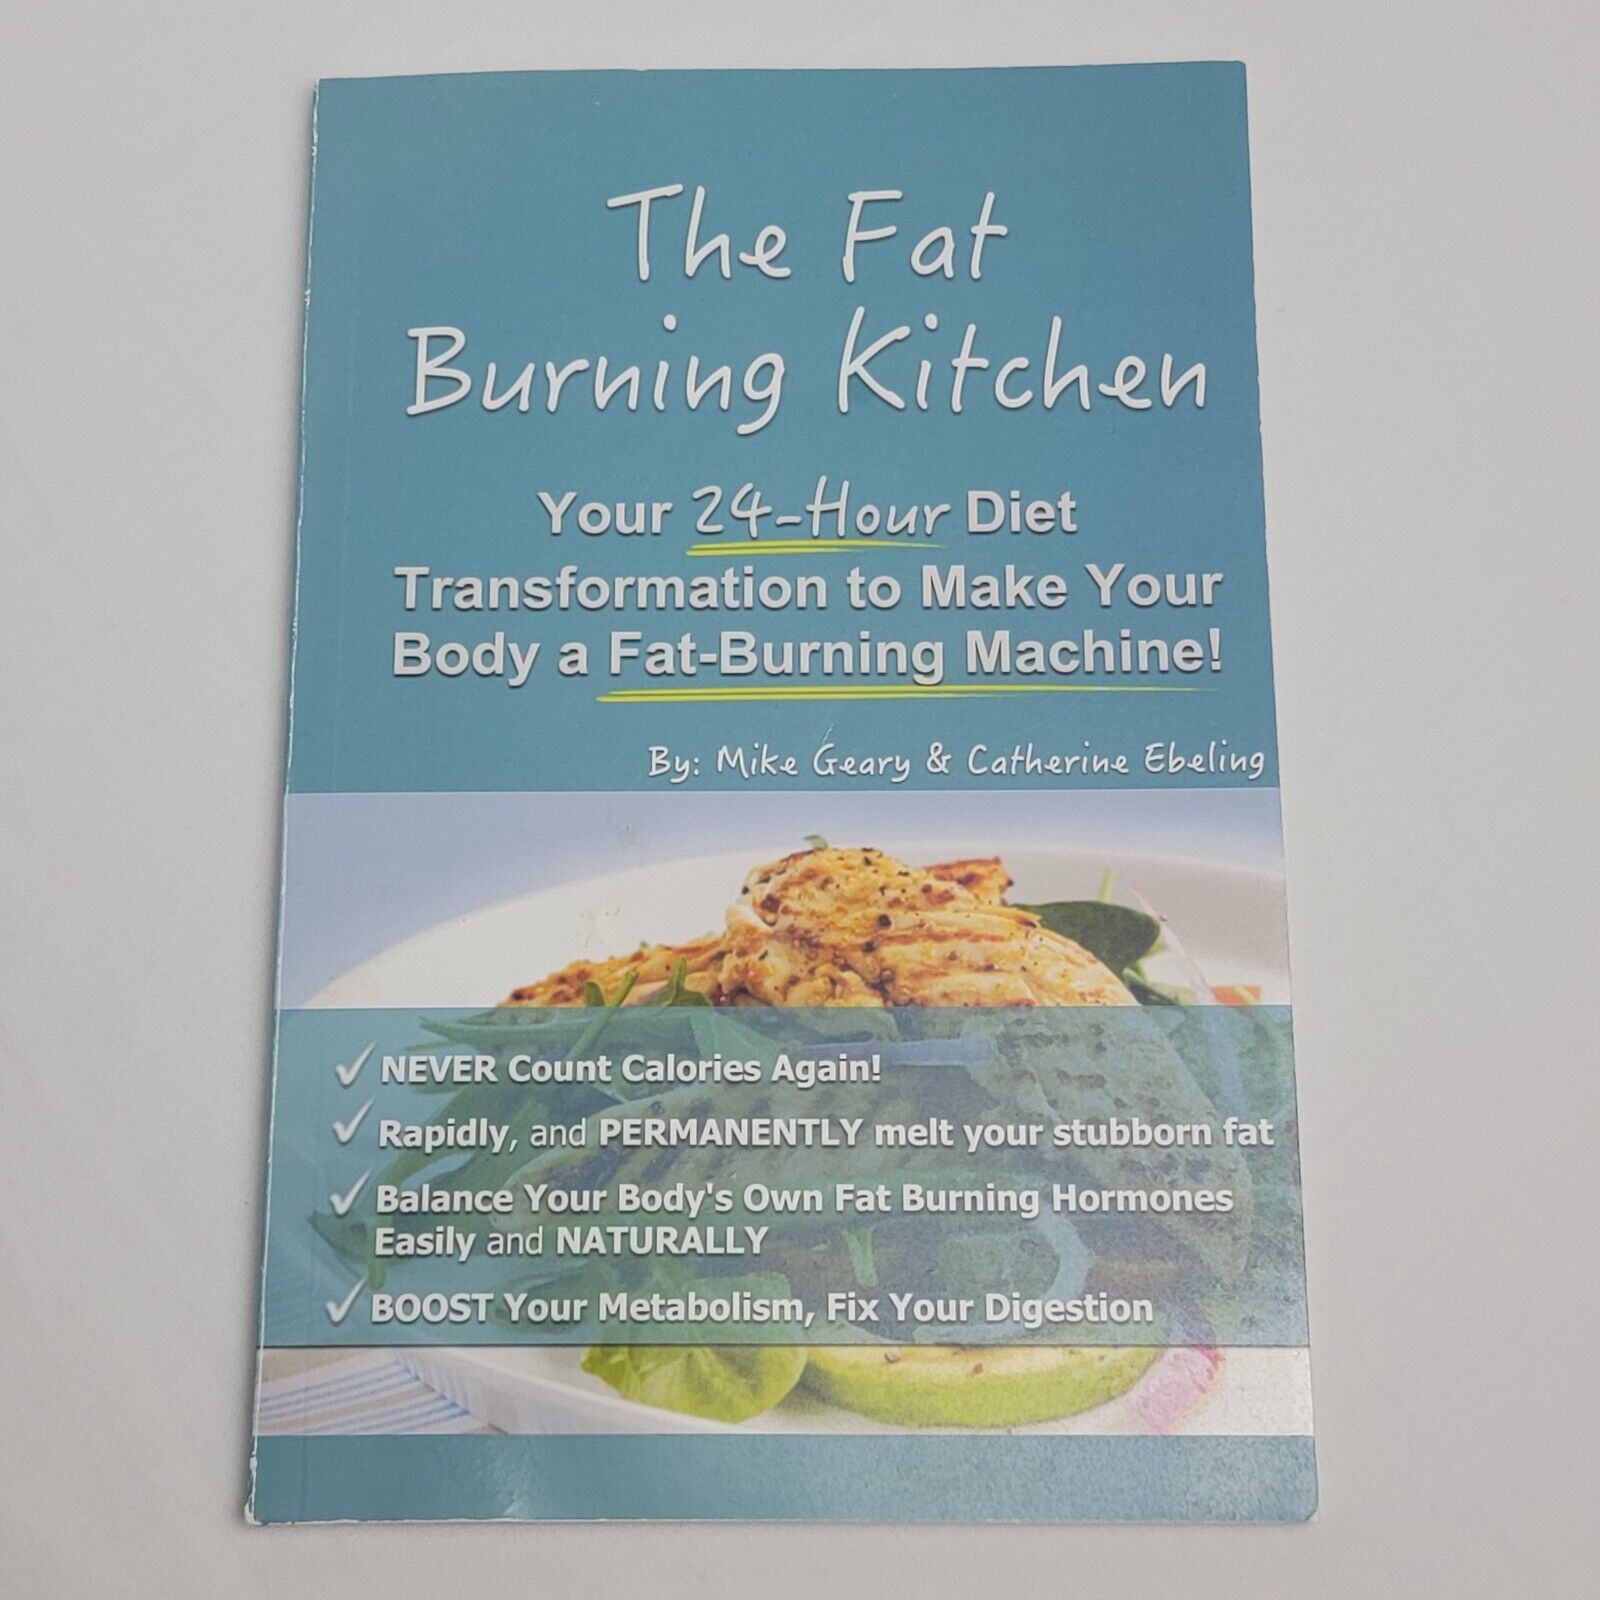 The Fat Burning Kitchen Book by Mike Geary, Catherine Ebeling